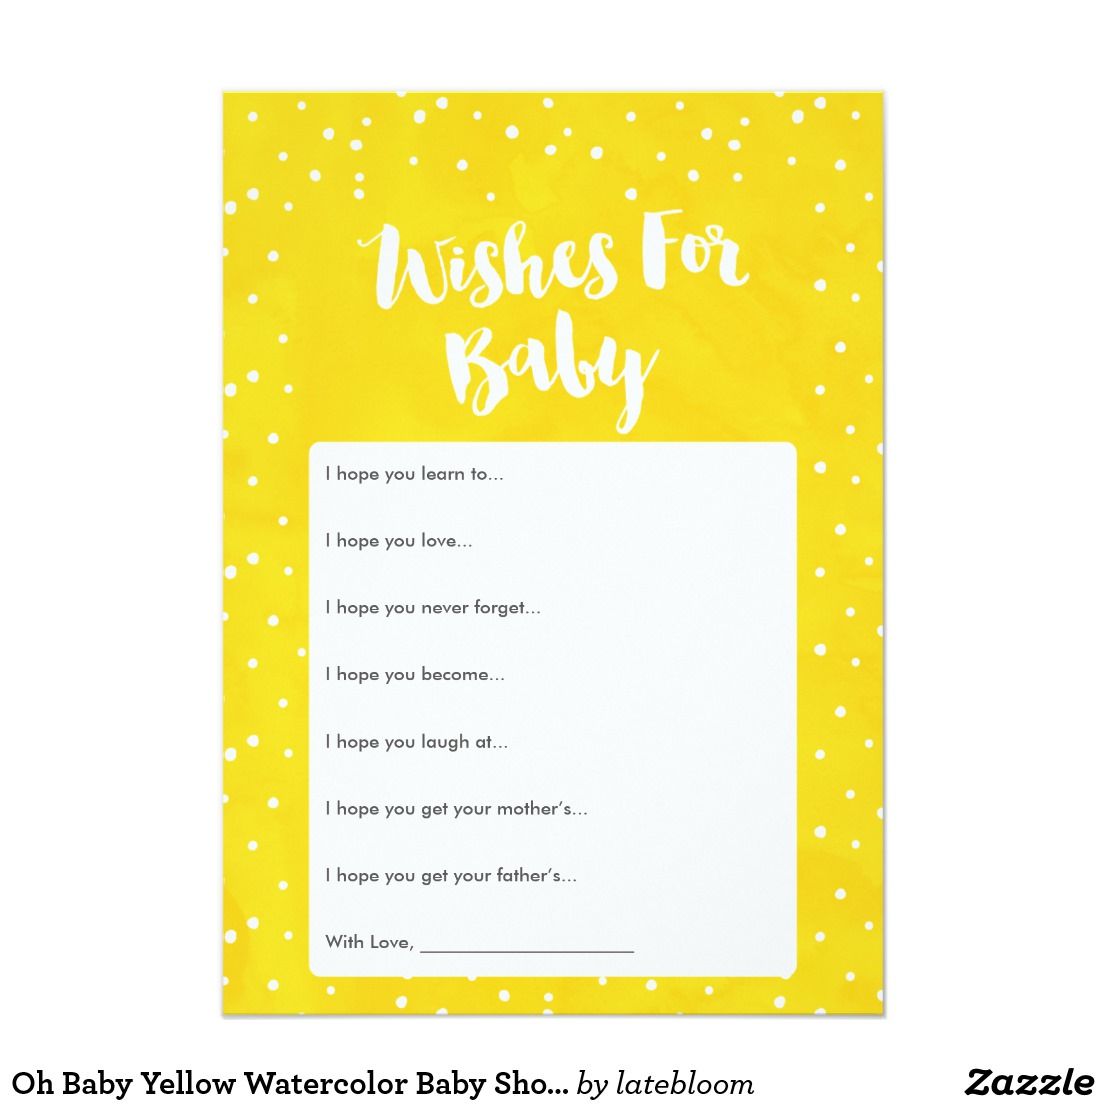 Full Size of Baby Shower:stylish Baby Shower Wishes Picture Inspirations Baby Shower Wishes Oh Baby Yellow Watercolor Baby Shower Wishes Card Yellow Baby Oh Baby Yellow Watercolor Baby Shower Wishes Card Have Fun At Your Baby Shower With An Adorable Yellow Baby Shower Wishes Card Have Your Guests Fill This